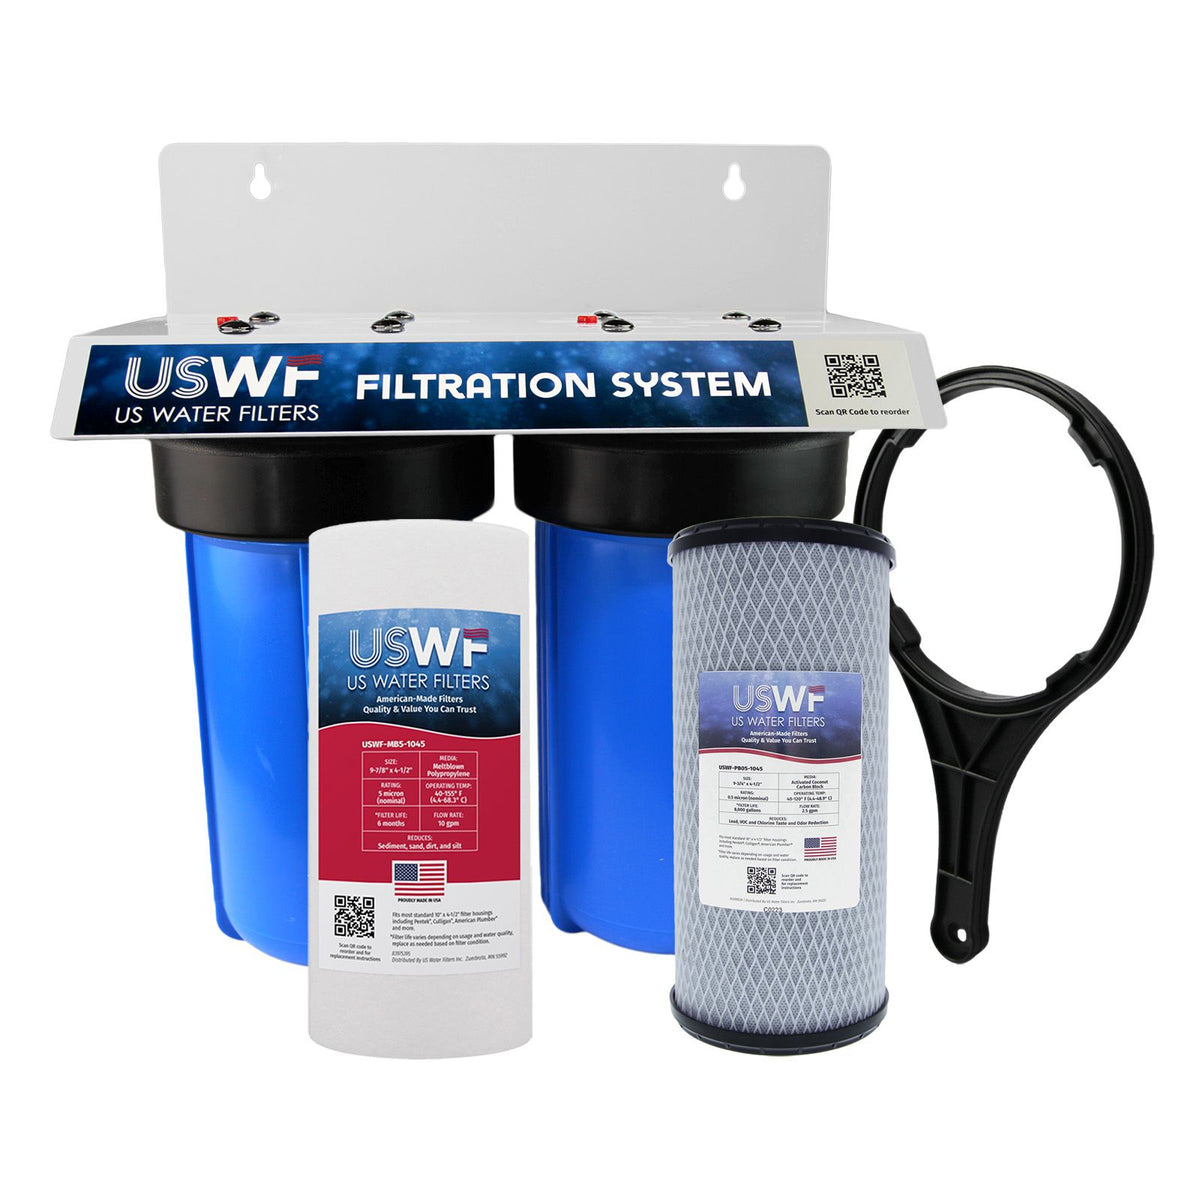 USWF Lead Dual 10&quot; 2-Stage Filtration System, Sediment &amp; 10&quot; 0.5 Micron Lead Carbon Block Filters, 1&quot; Inlet/Outlet